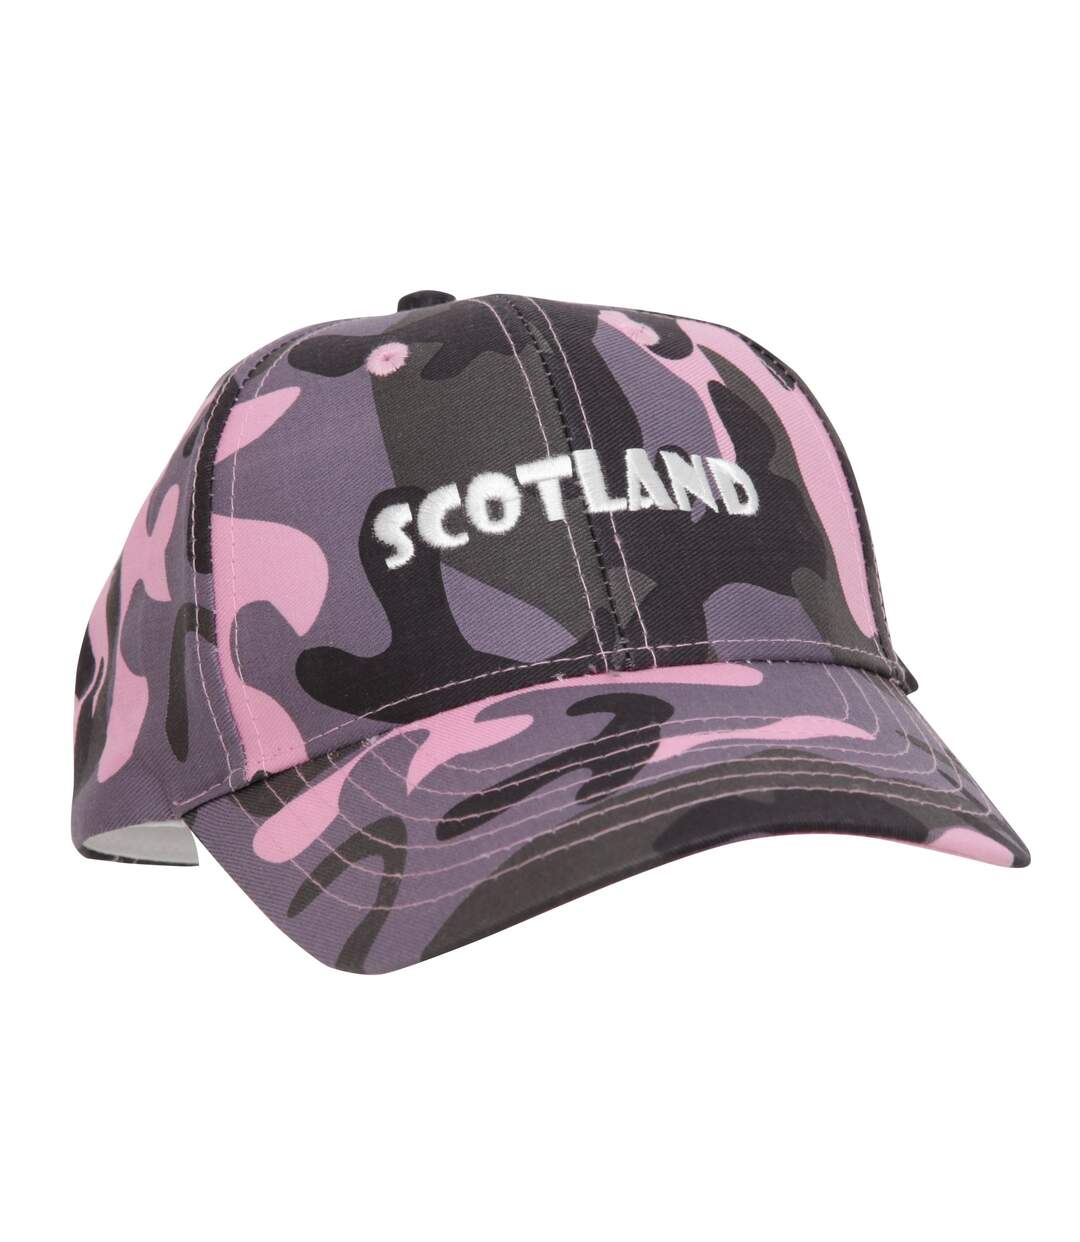 Ladies/Womens Scotland Embroidered Camouflage Baseball Cap (Pink Camouflage)